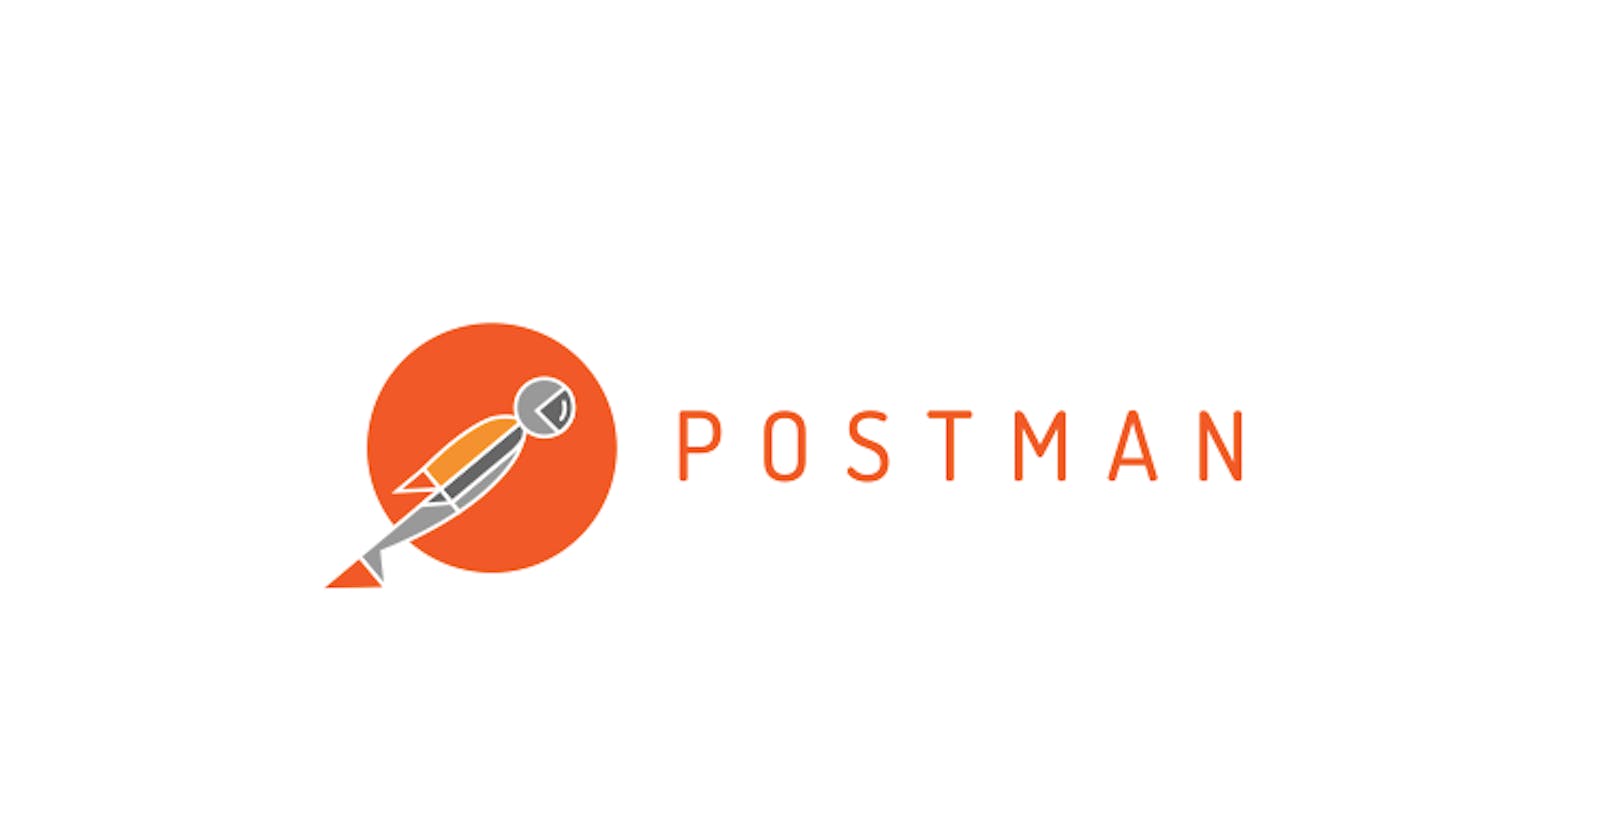 My interview experience at Postman